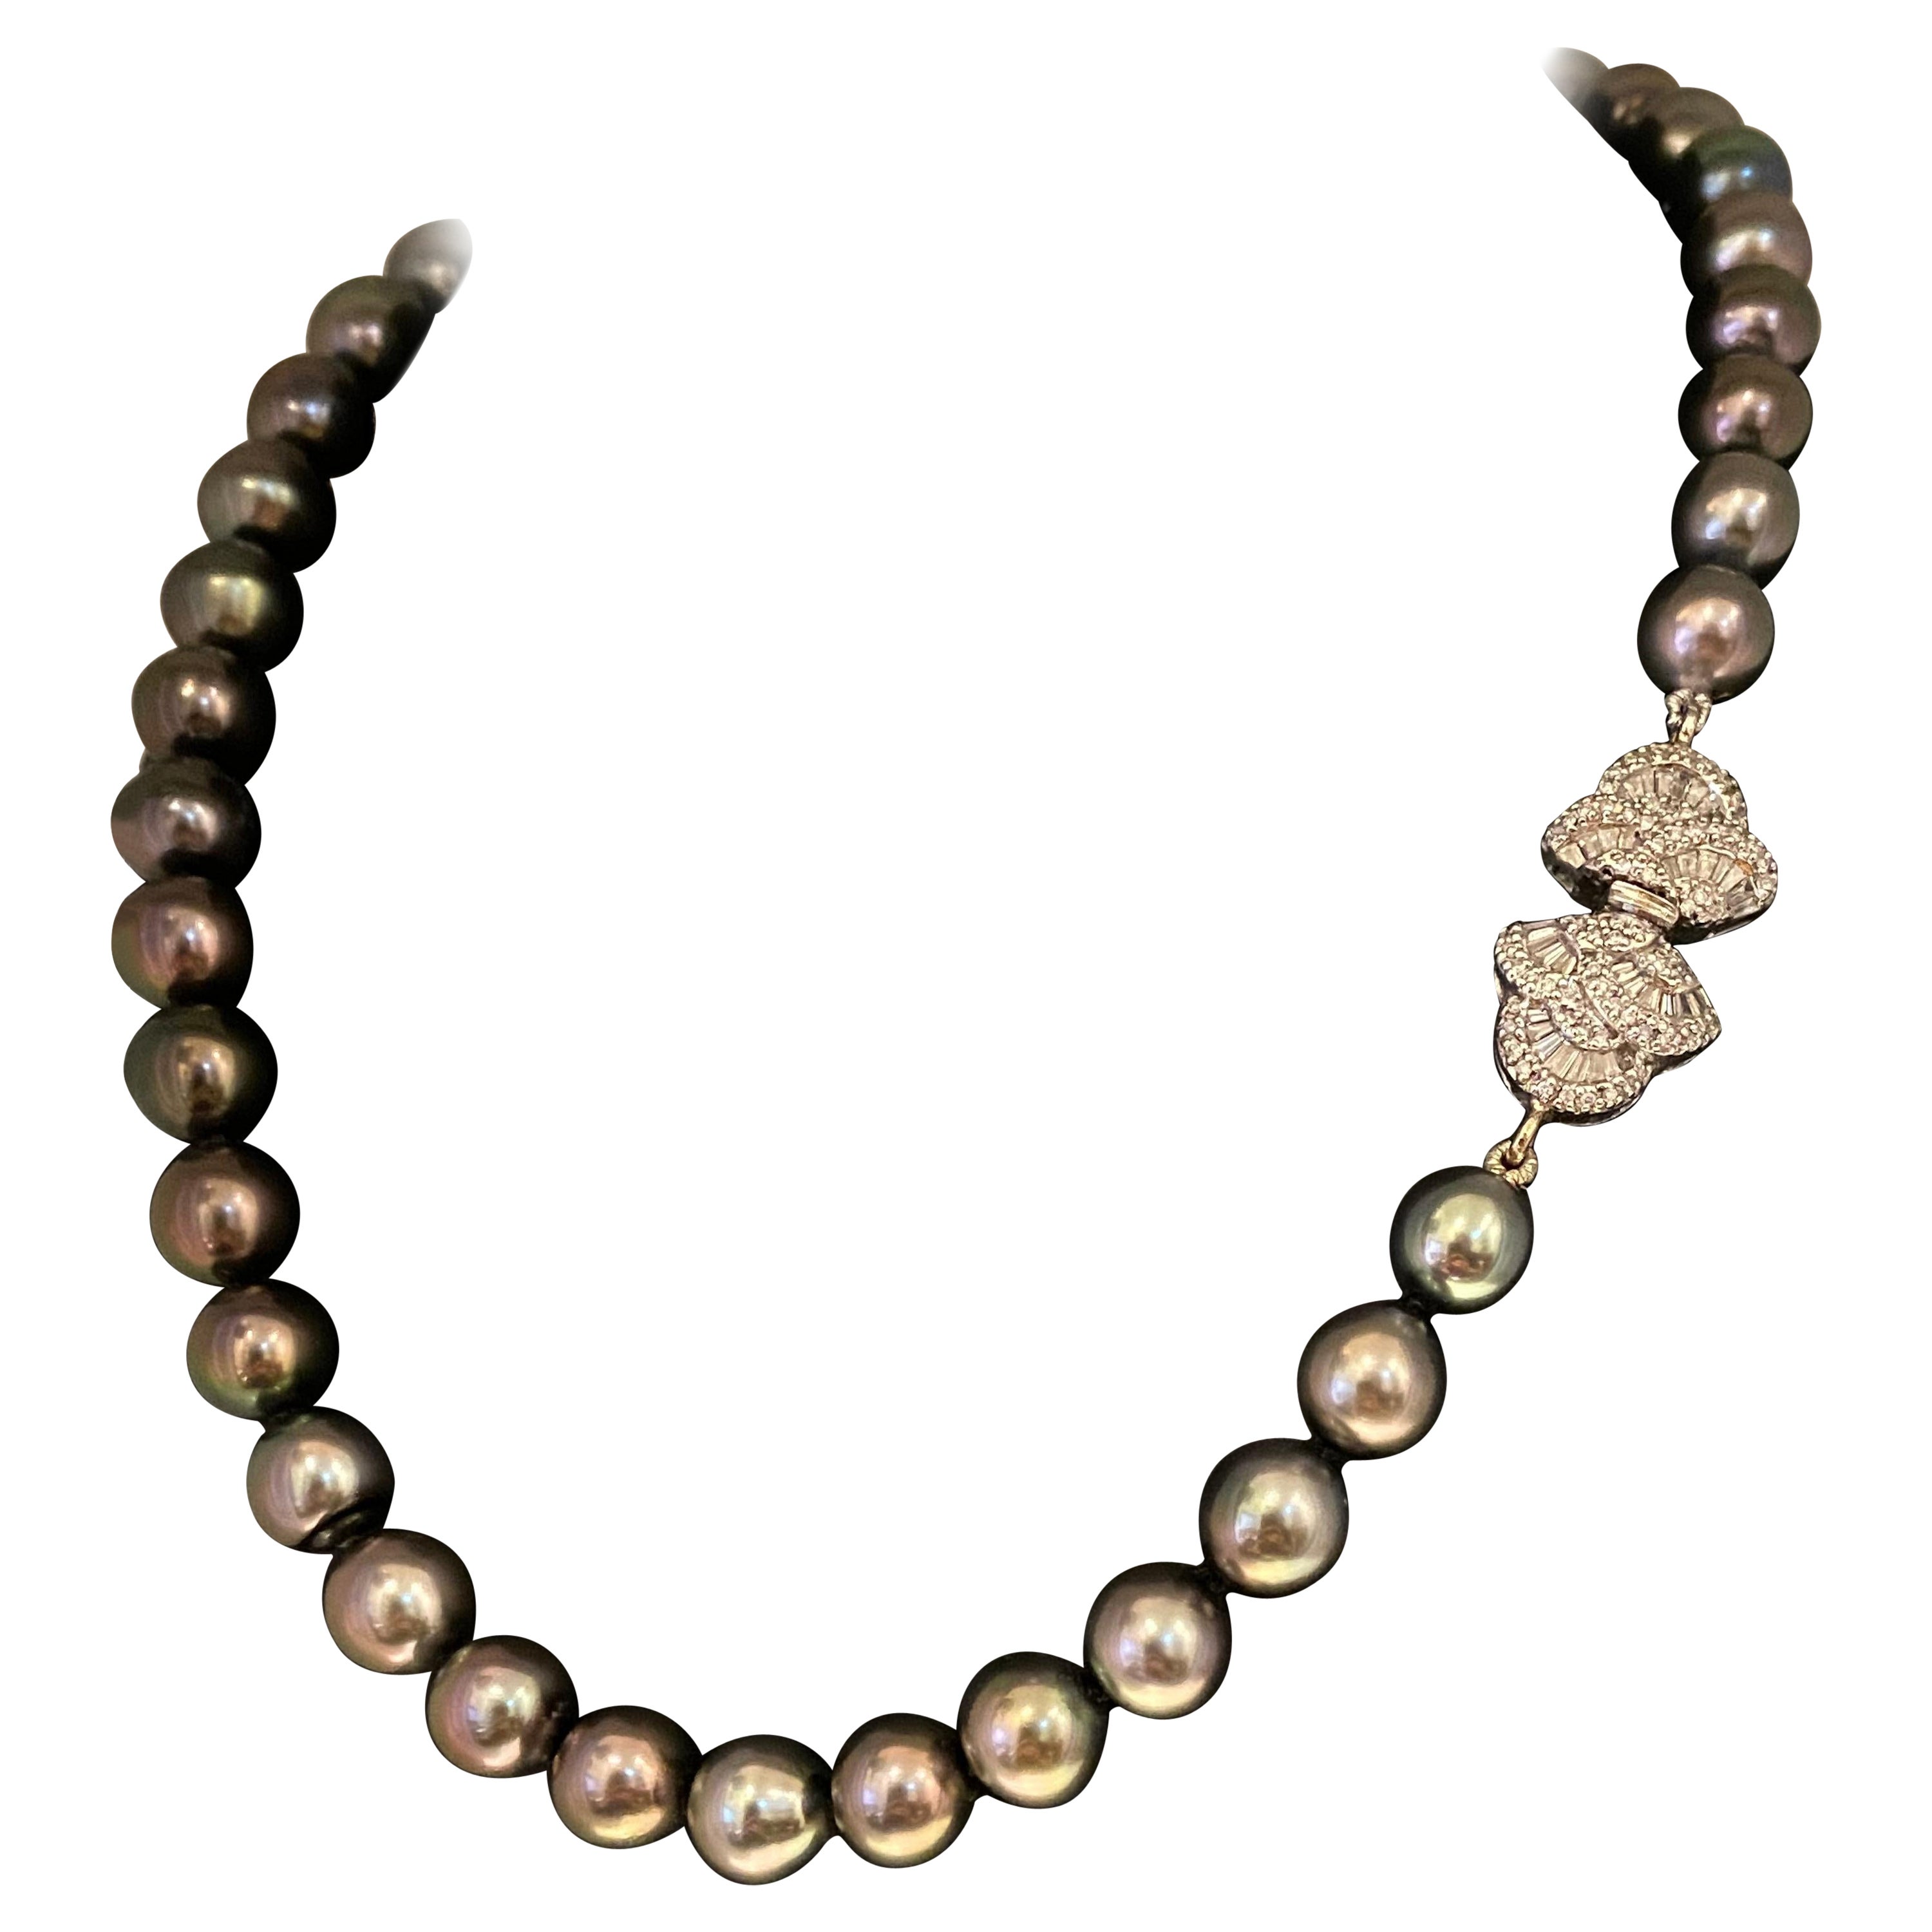 Tahitian Royal Peacock 9-11mm Pearl Necklace with 18K Gold 1.25ct Diamond Clasp